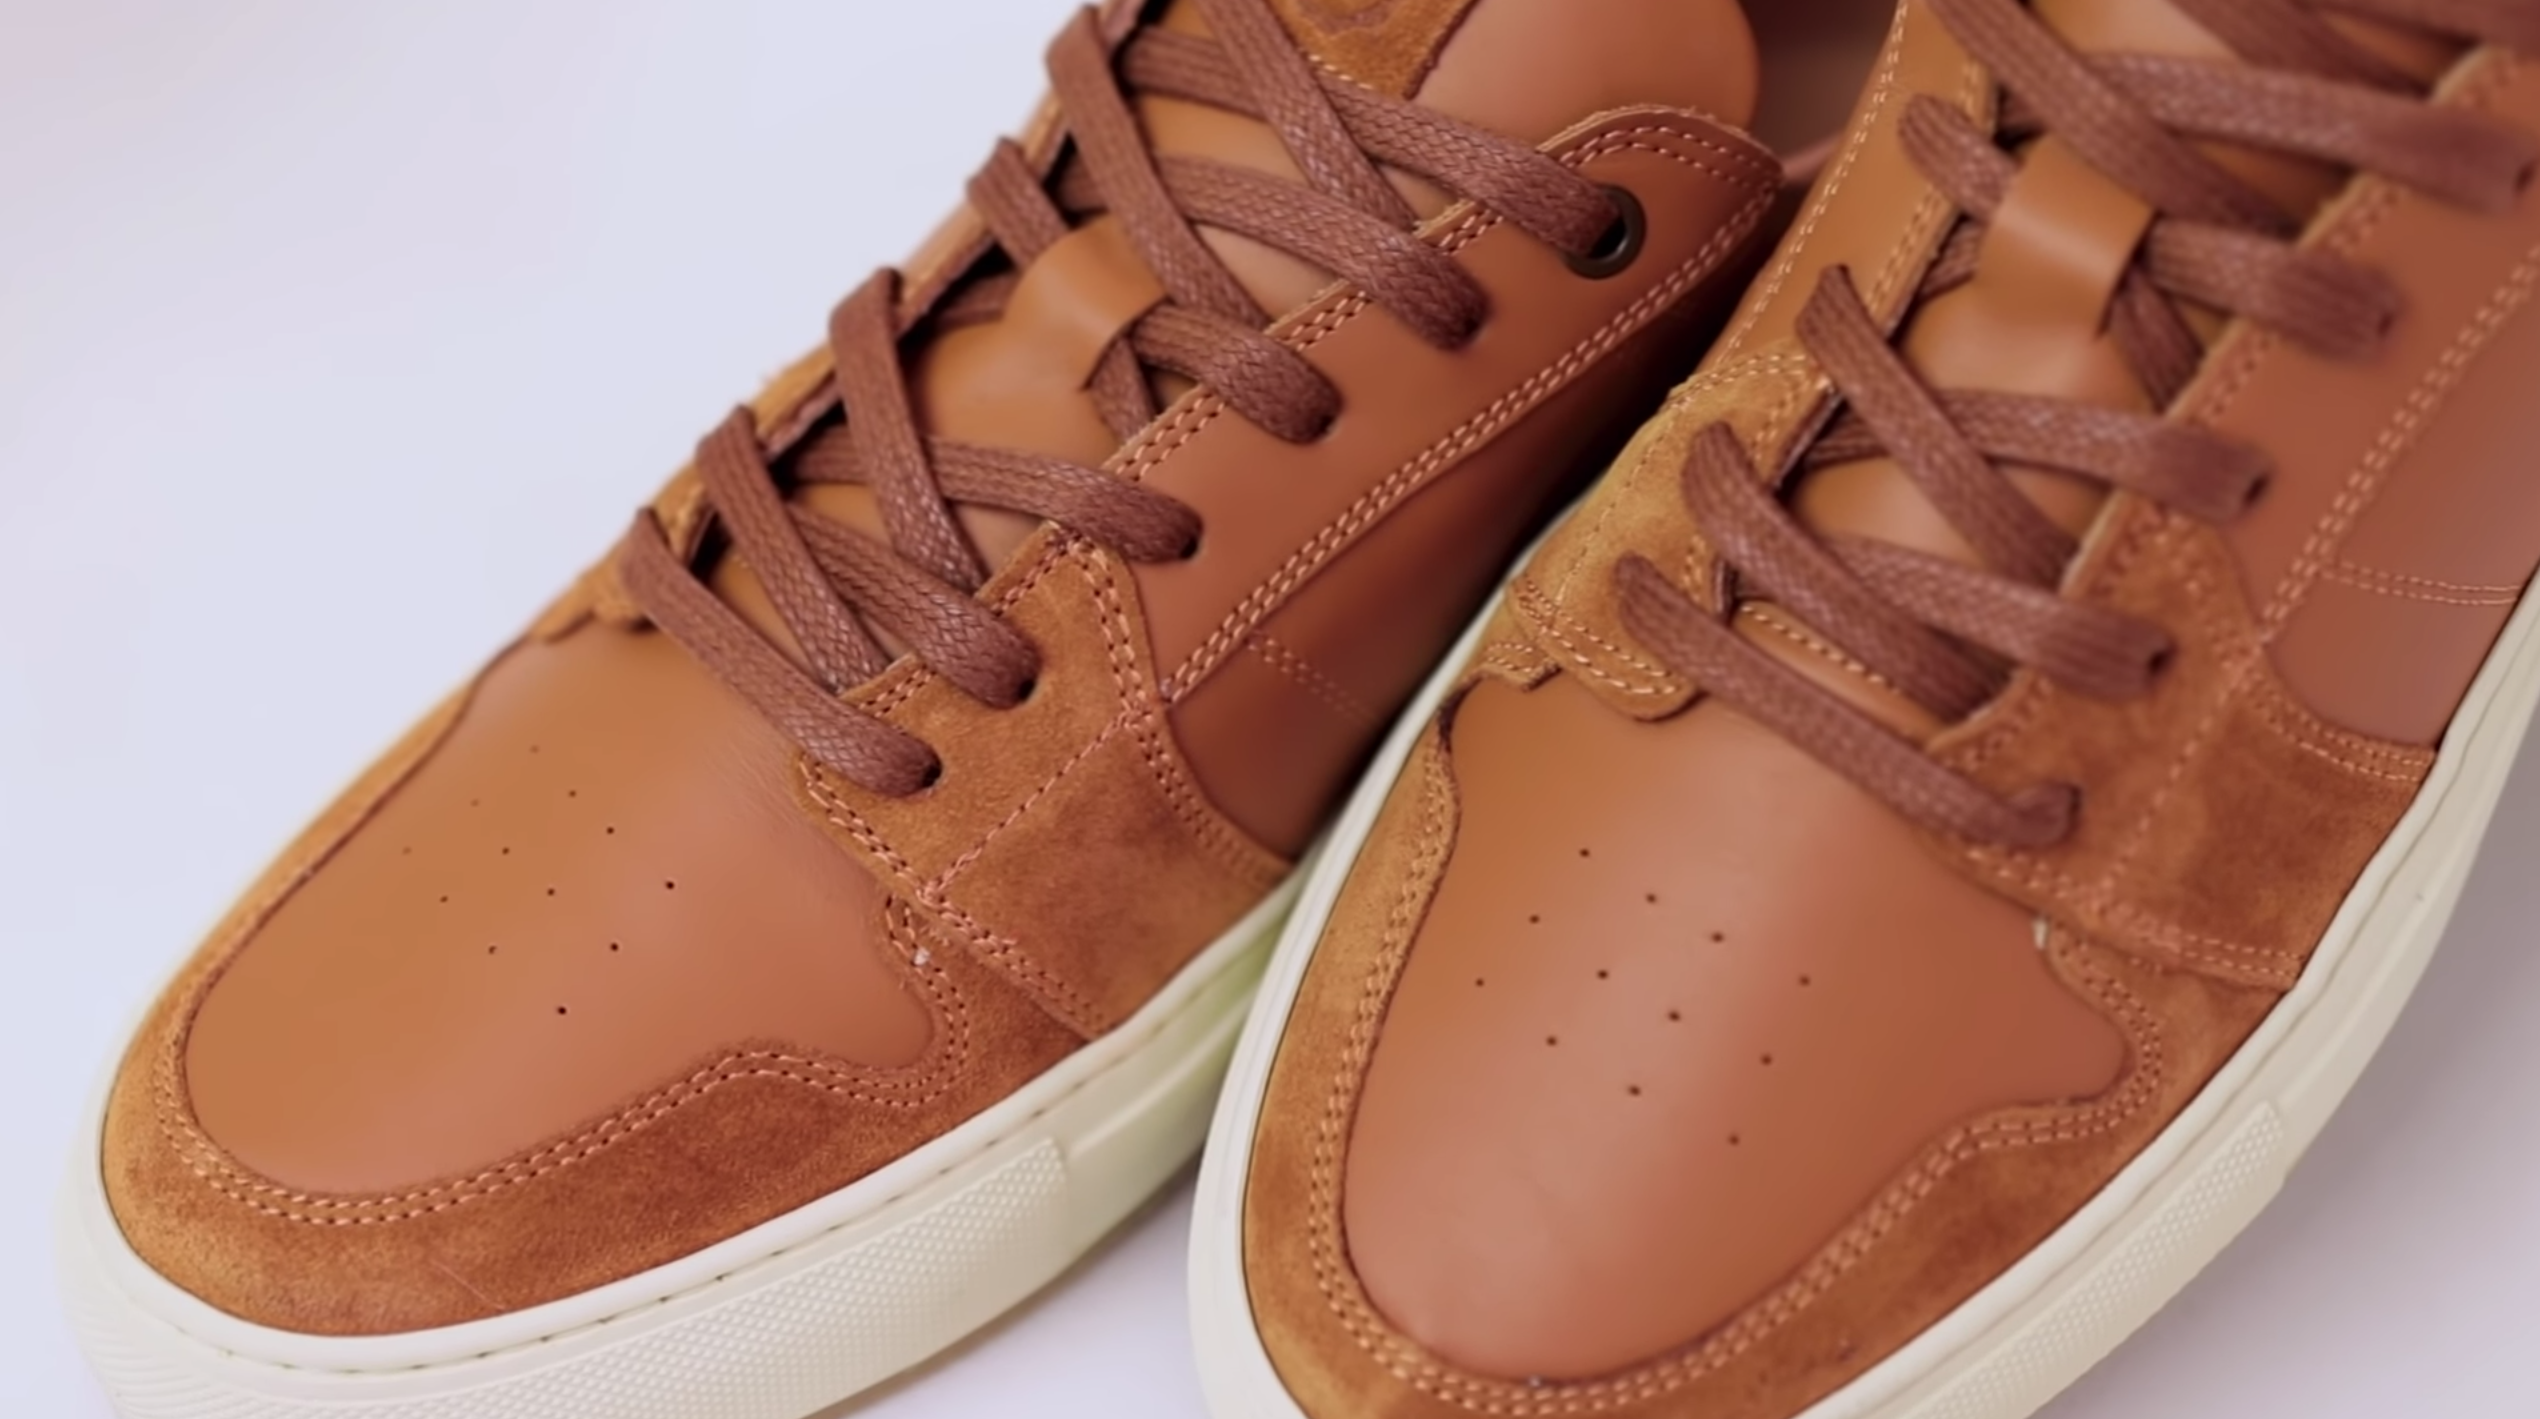 Greats Court leather sneakers in tan